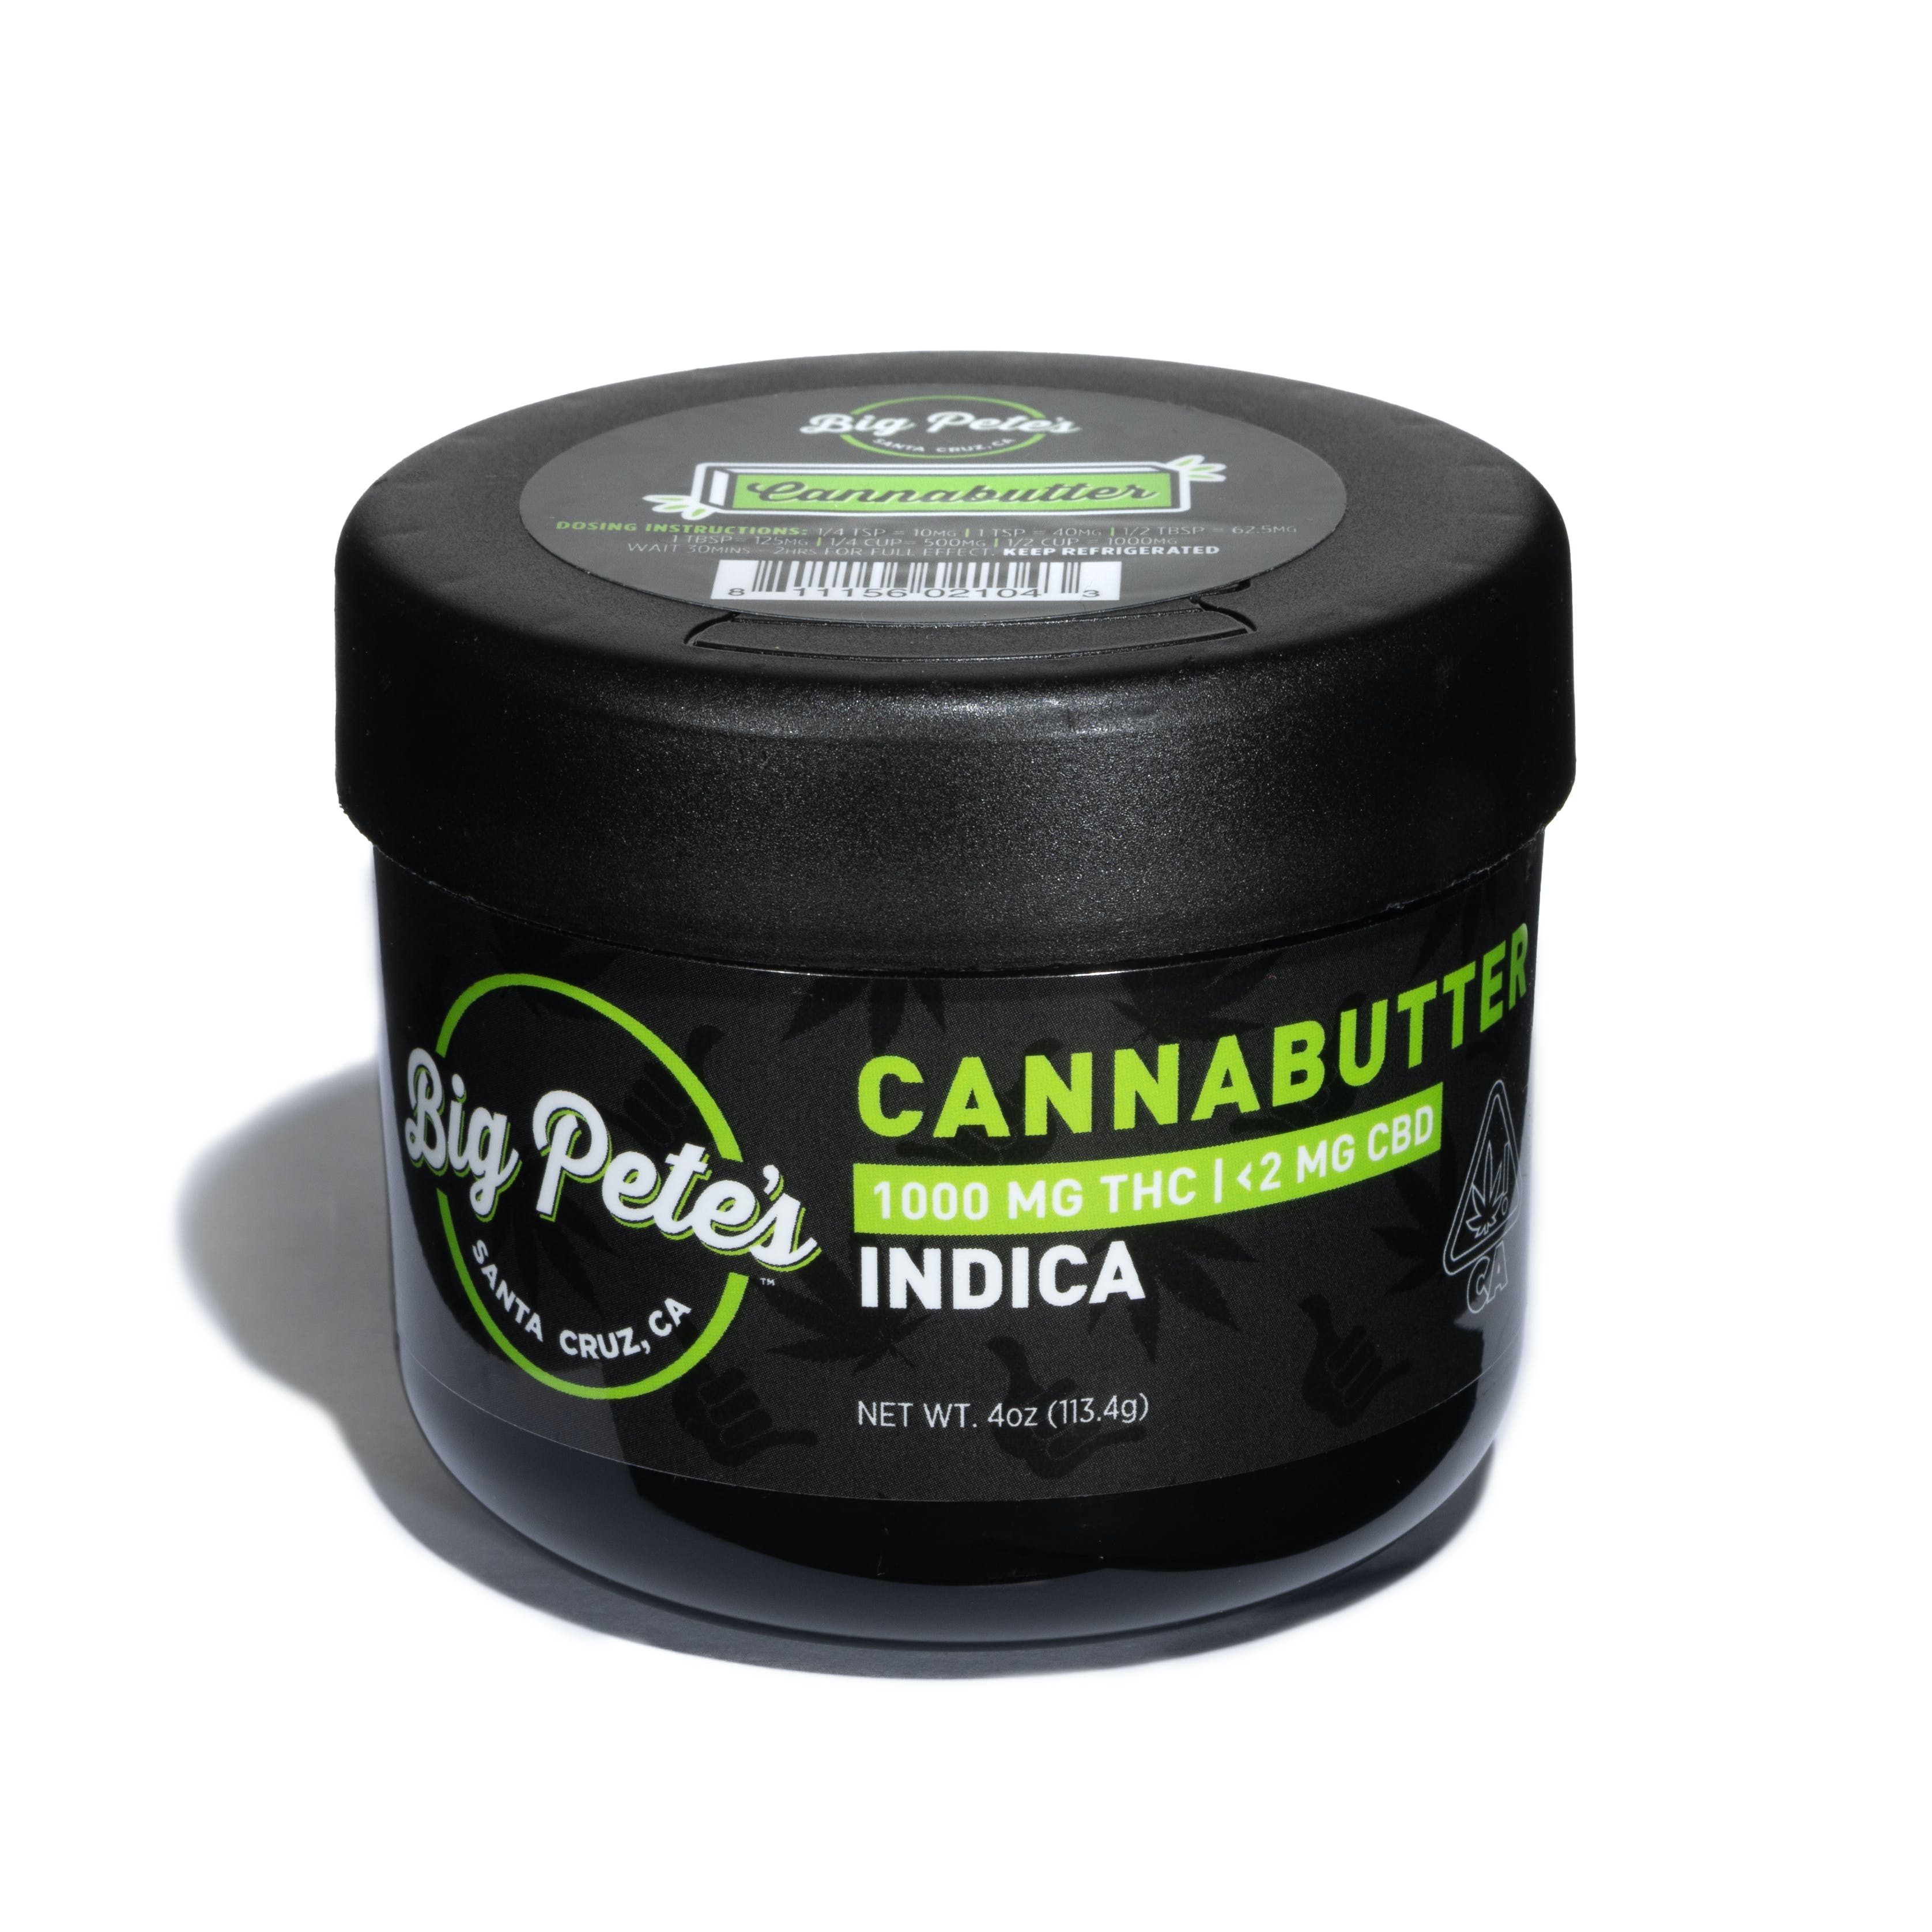 Big Pete's Canna Butter Indica